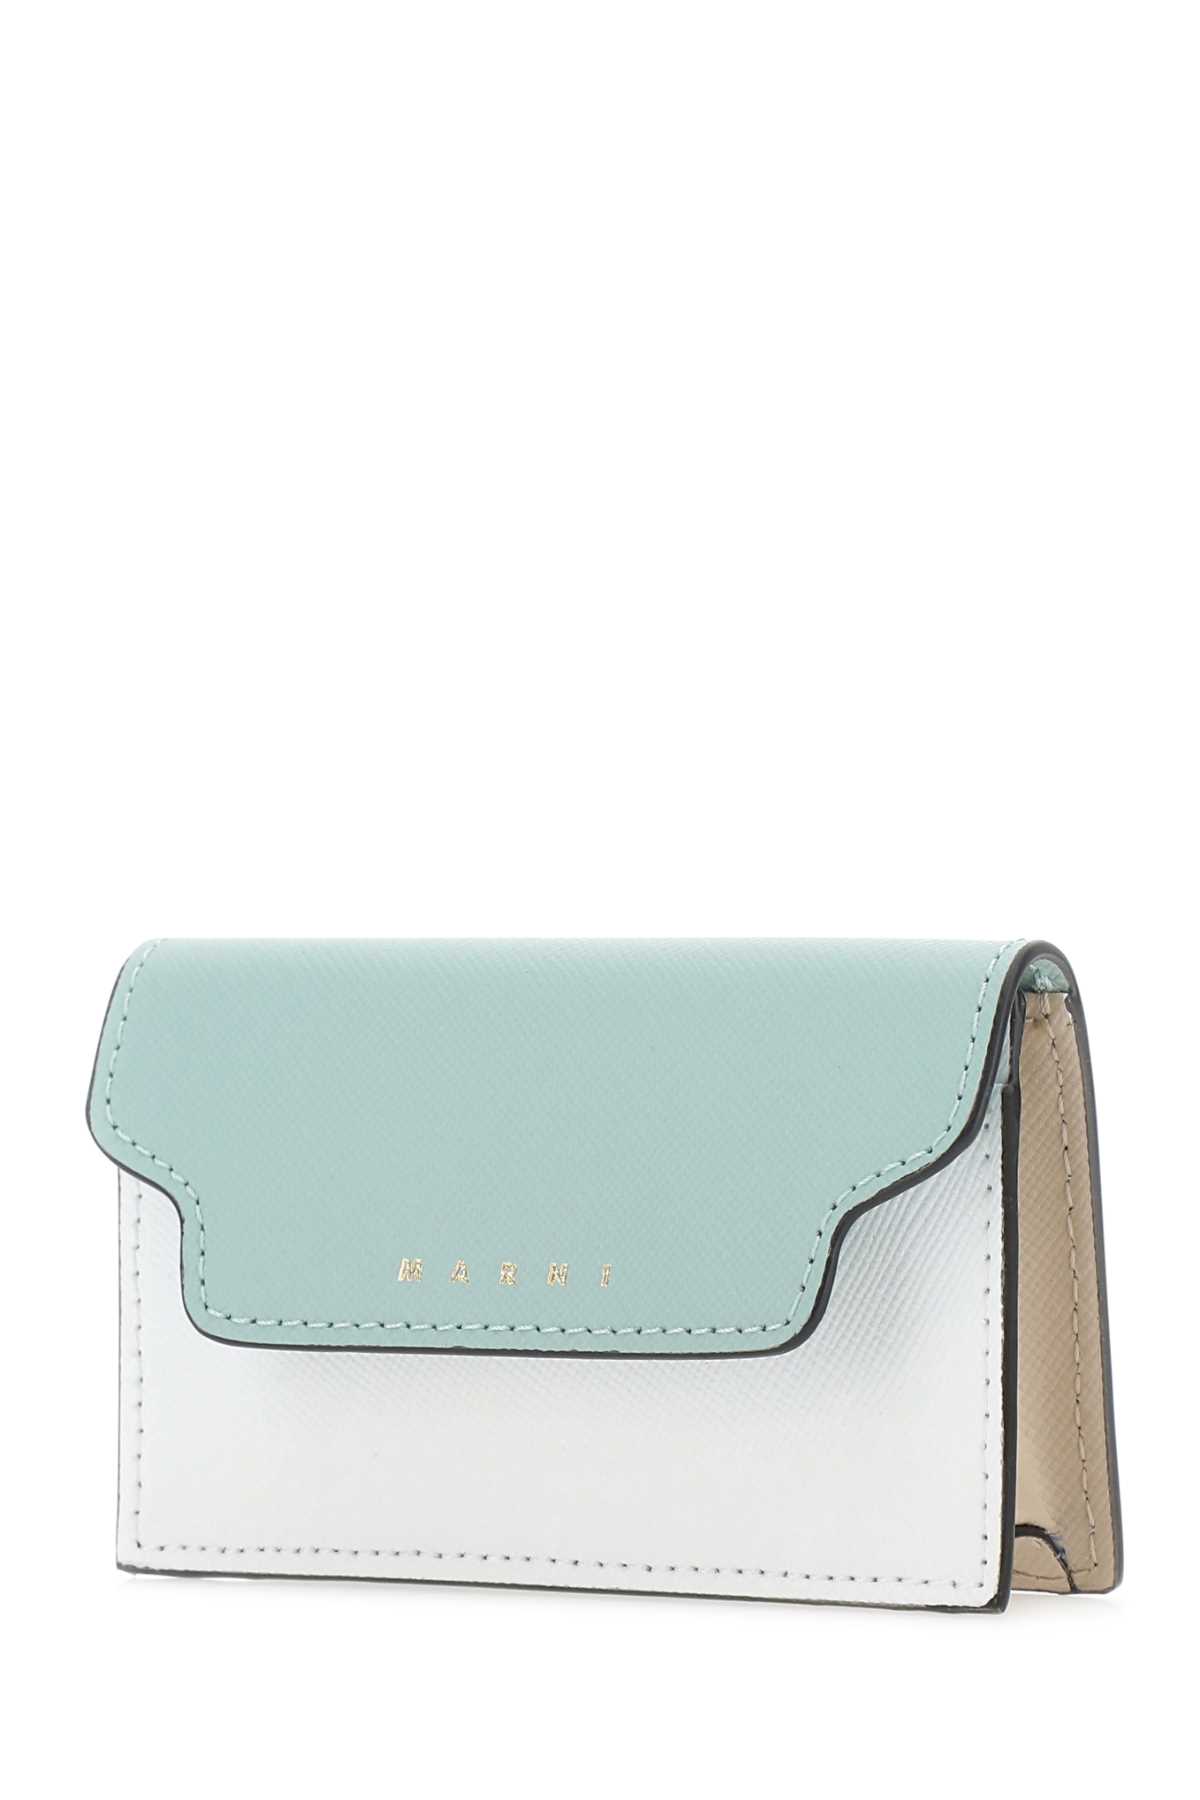 Marni Multicolor Leather Business Card Holder In Z120n